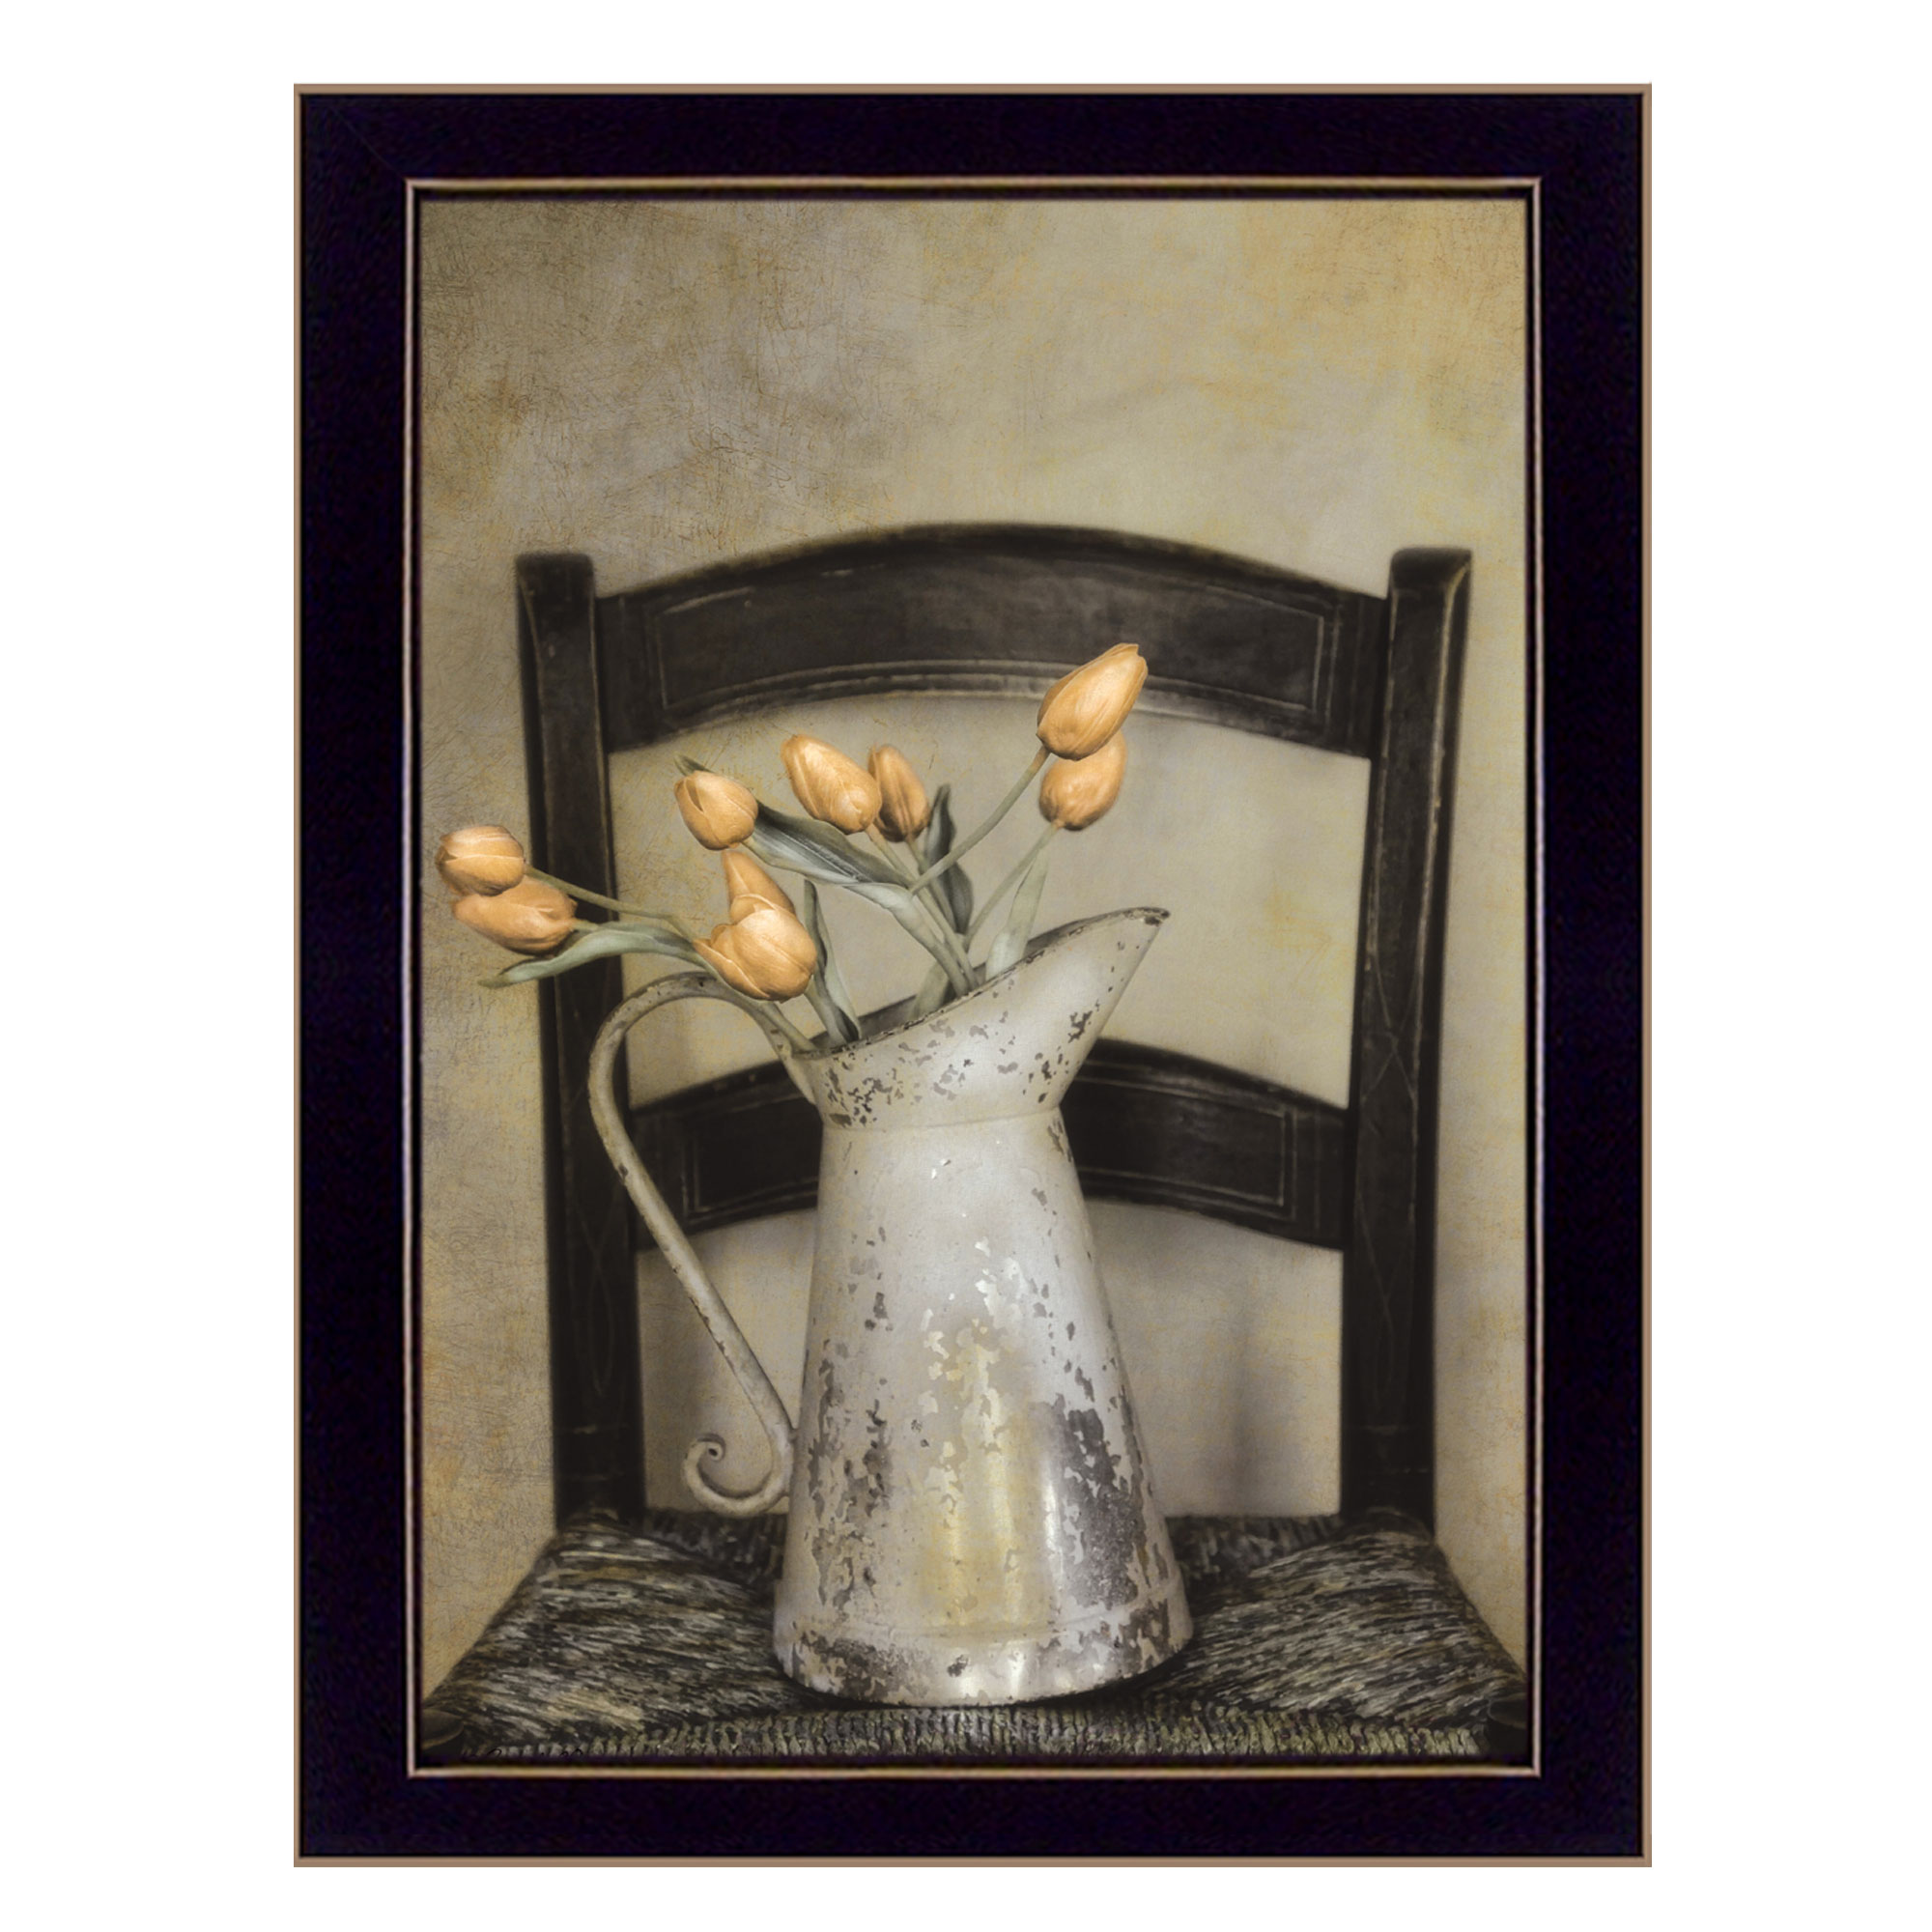 "Golden Tulips" by Robin-Lee Vieira, Ready to Hang Framed Print, Black Frame